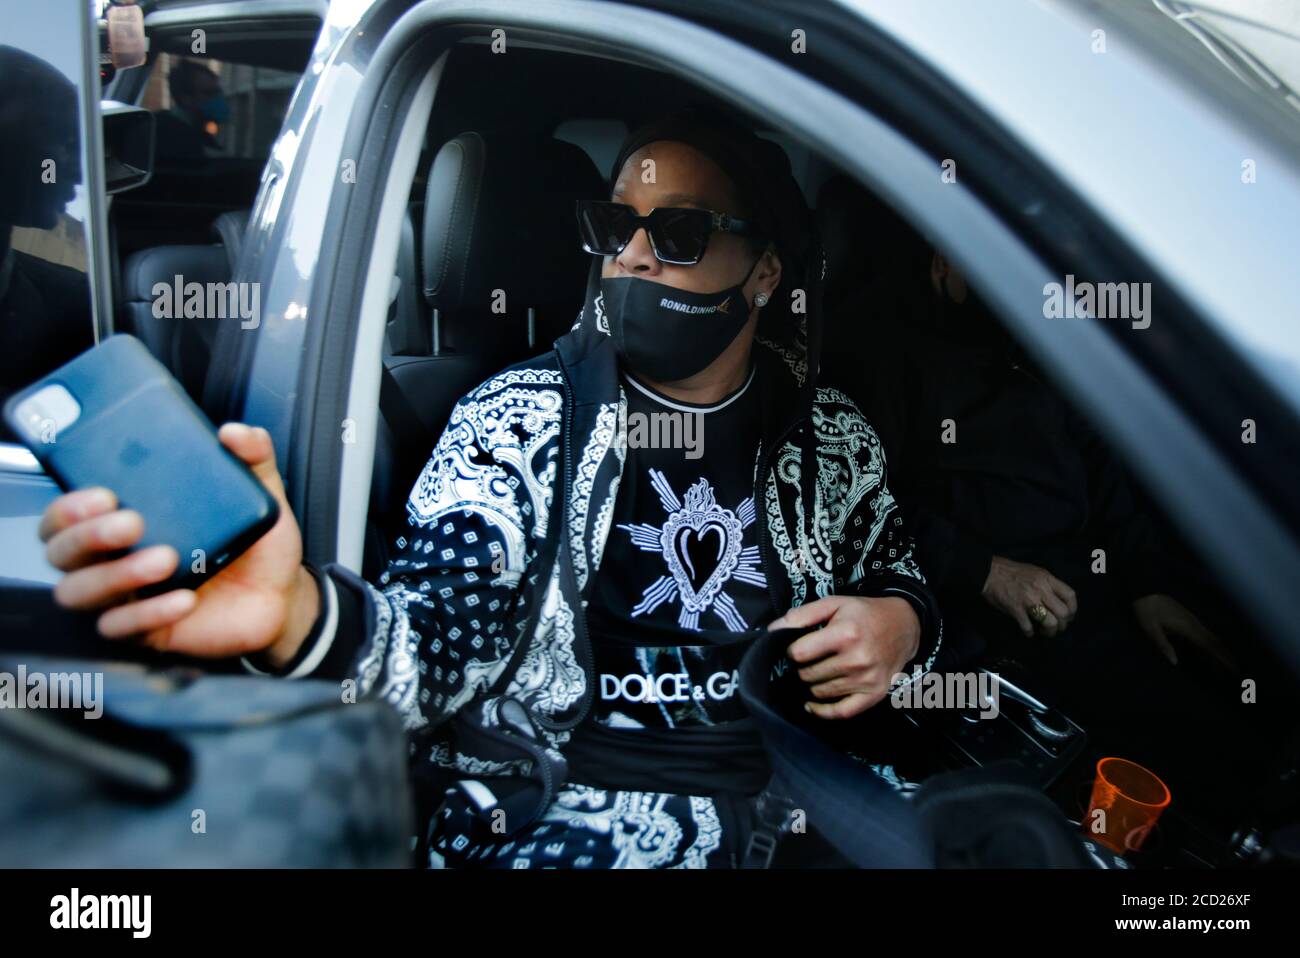 Rio de Janeiro,  Brazil  August 23,  Brazilian former soccer player Ronaldinho Gaucho arrives at Galeao airport arriving from Paraguay where was in prison Stock Photo